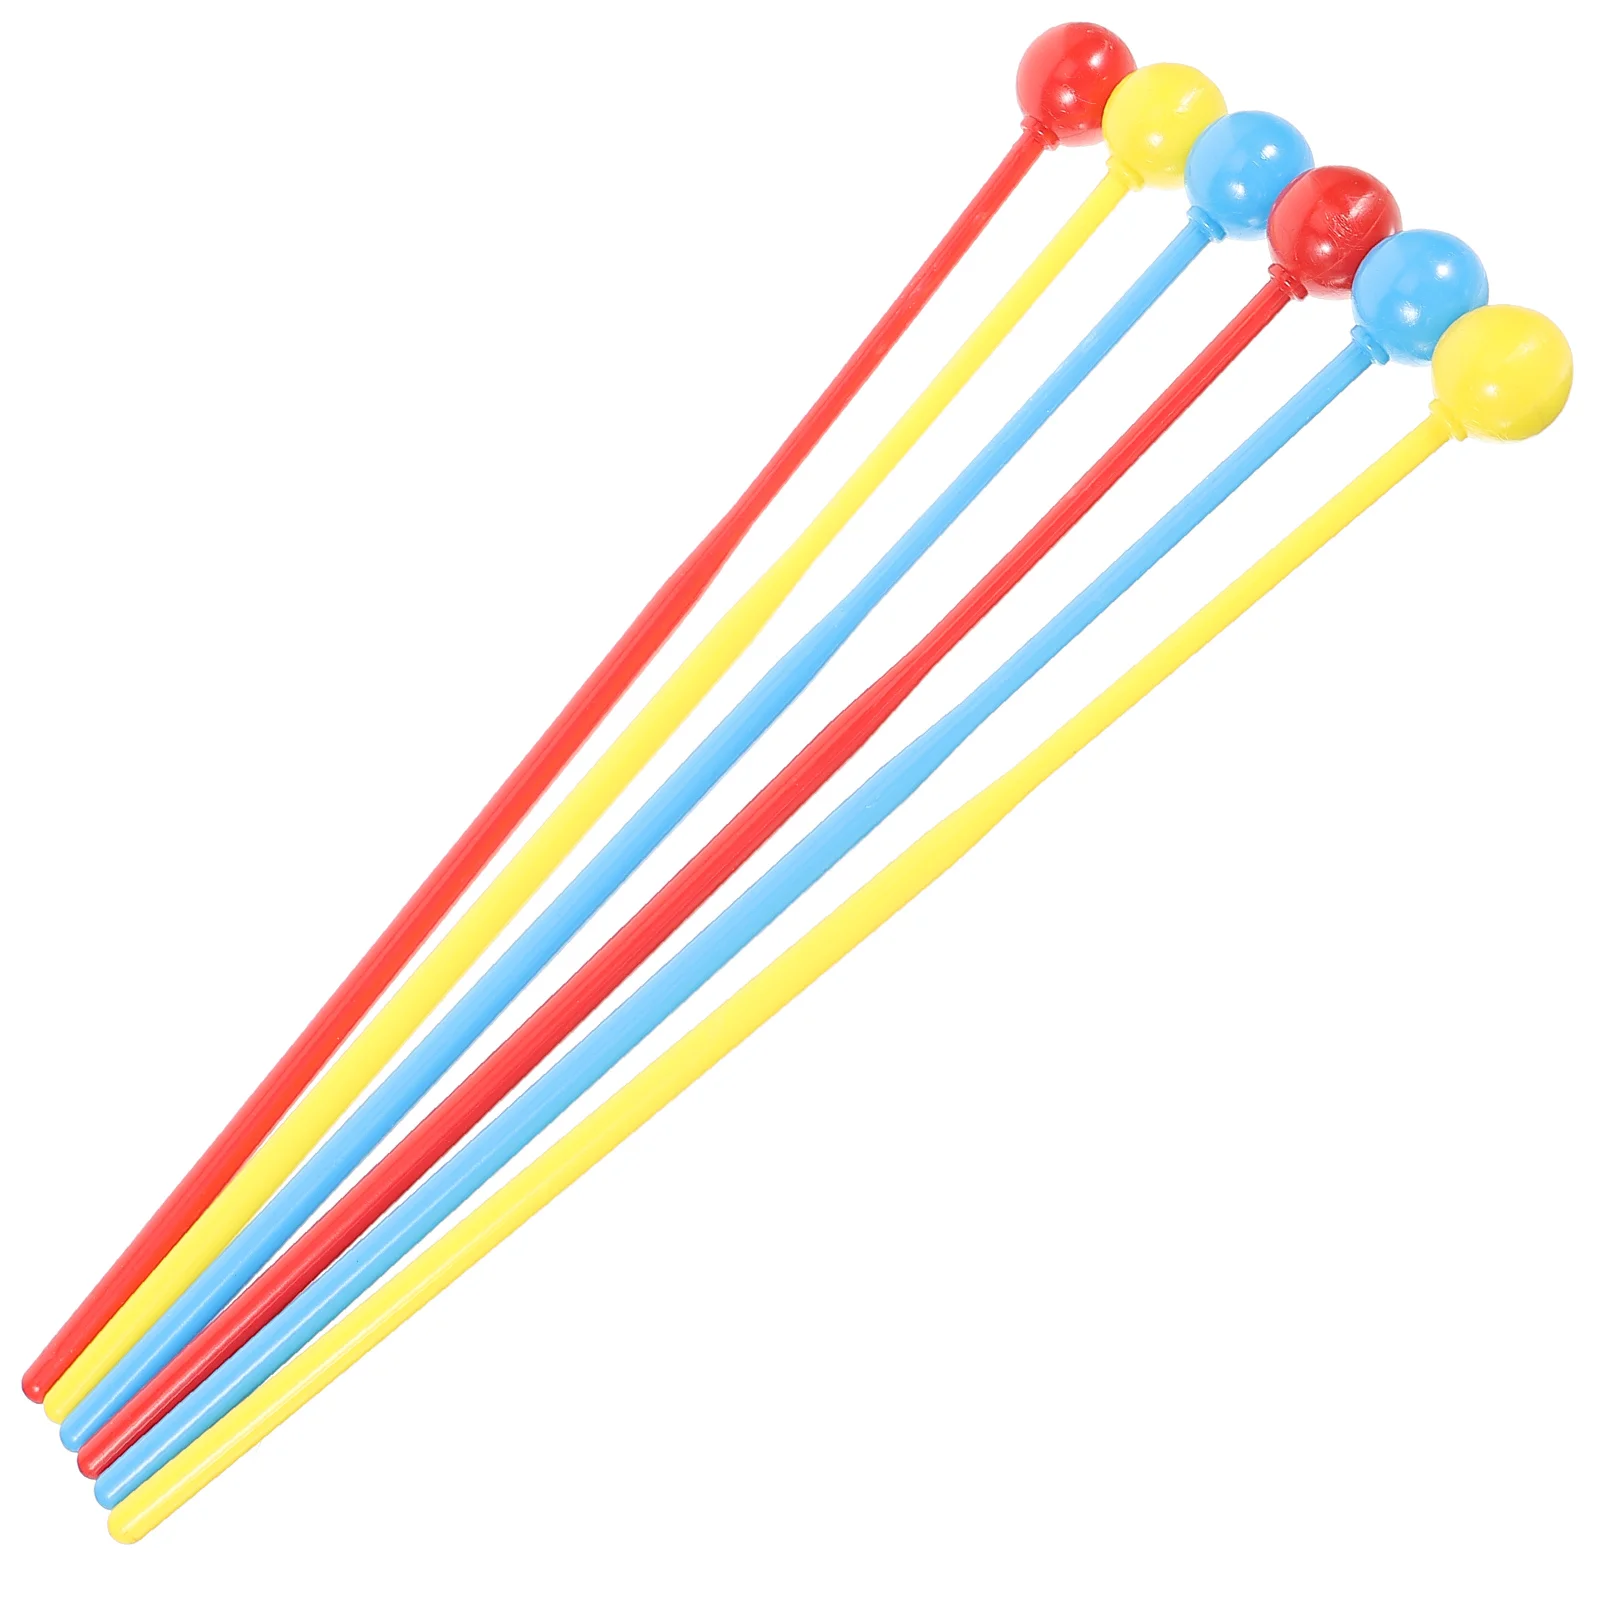 

3 Pairs Children's Drumsticks Marimba Mallets Xylophone Hammer Percussion Musical Instrument Plastic Toddler